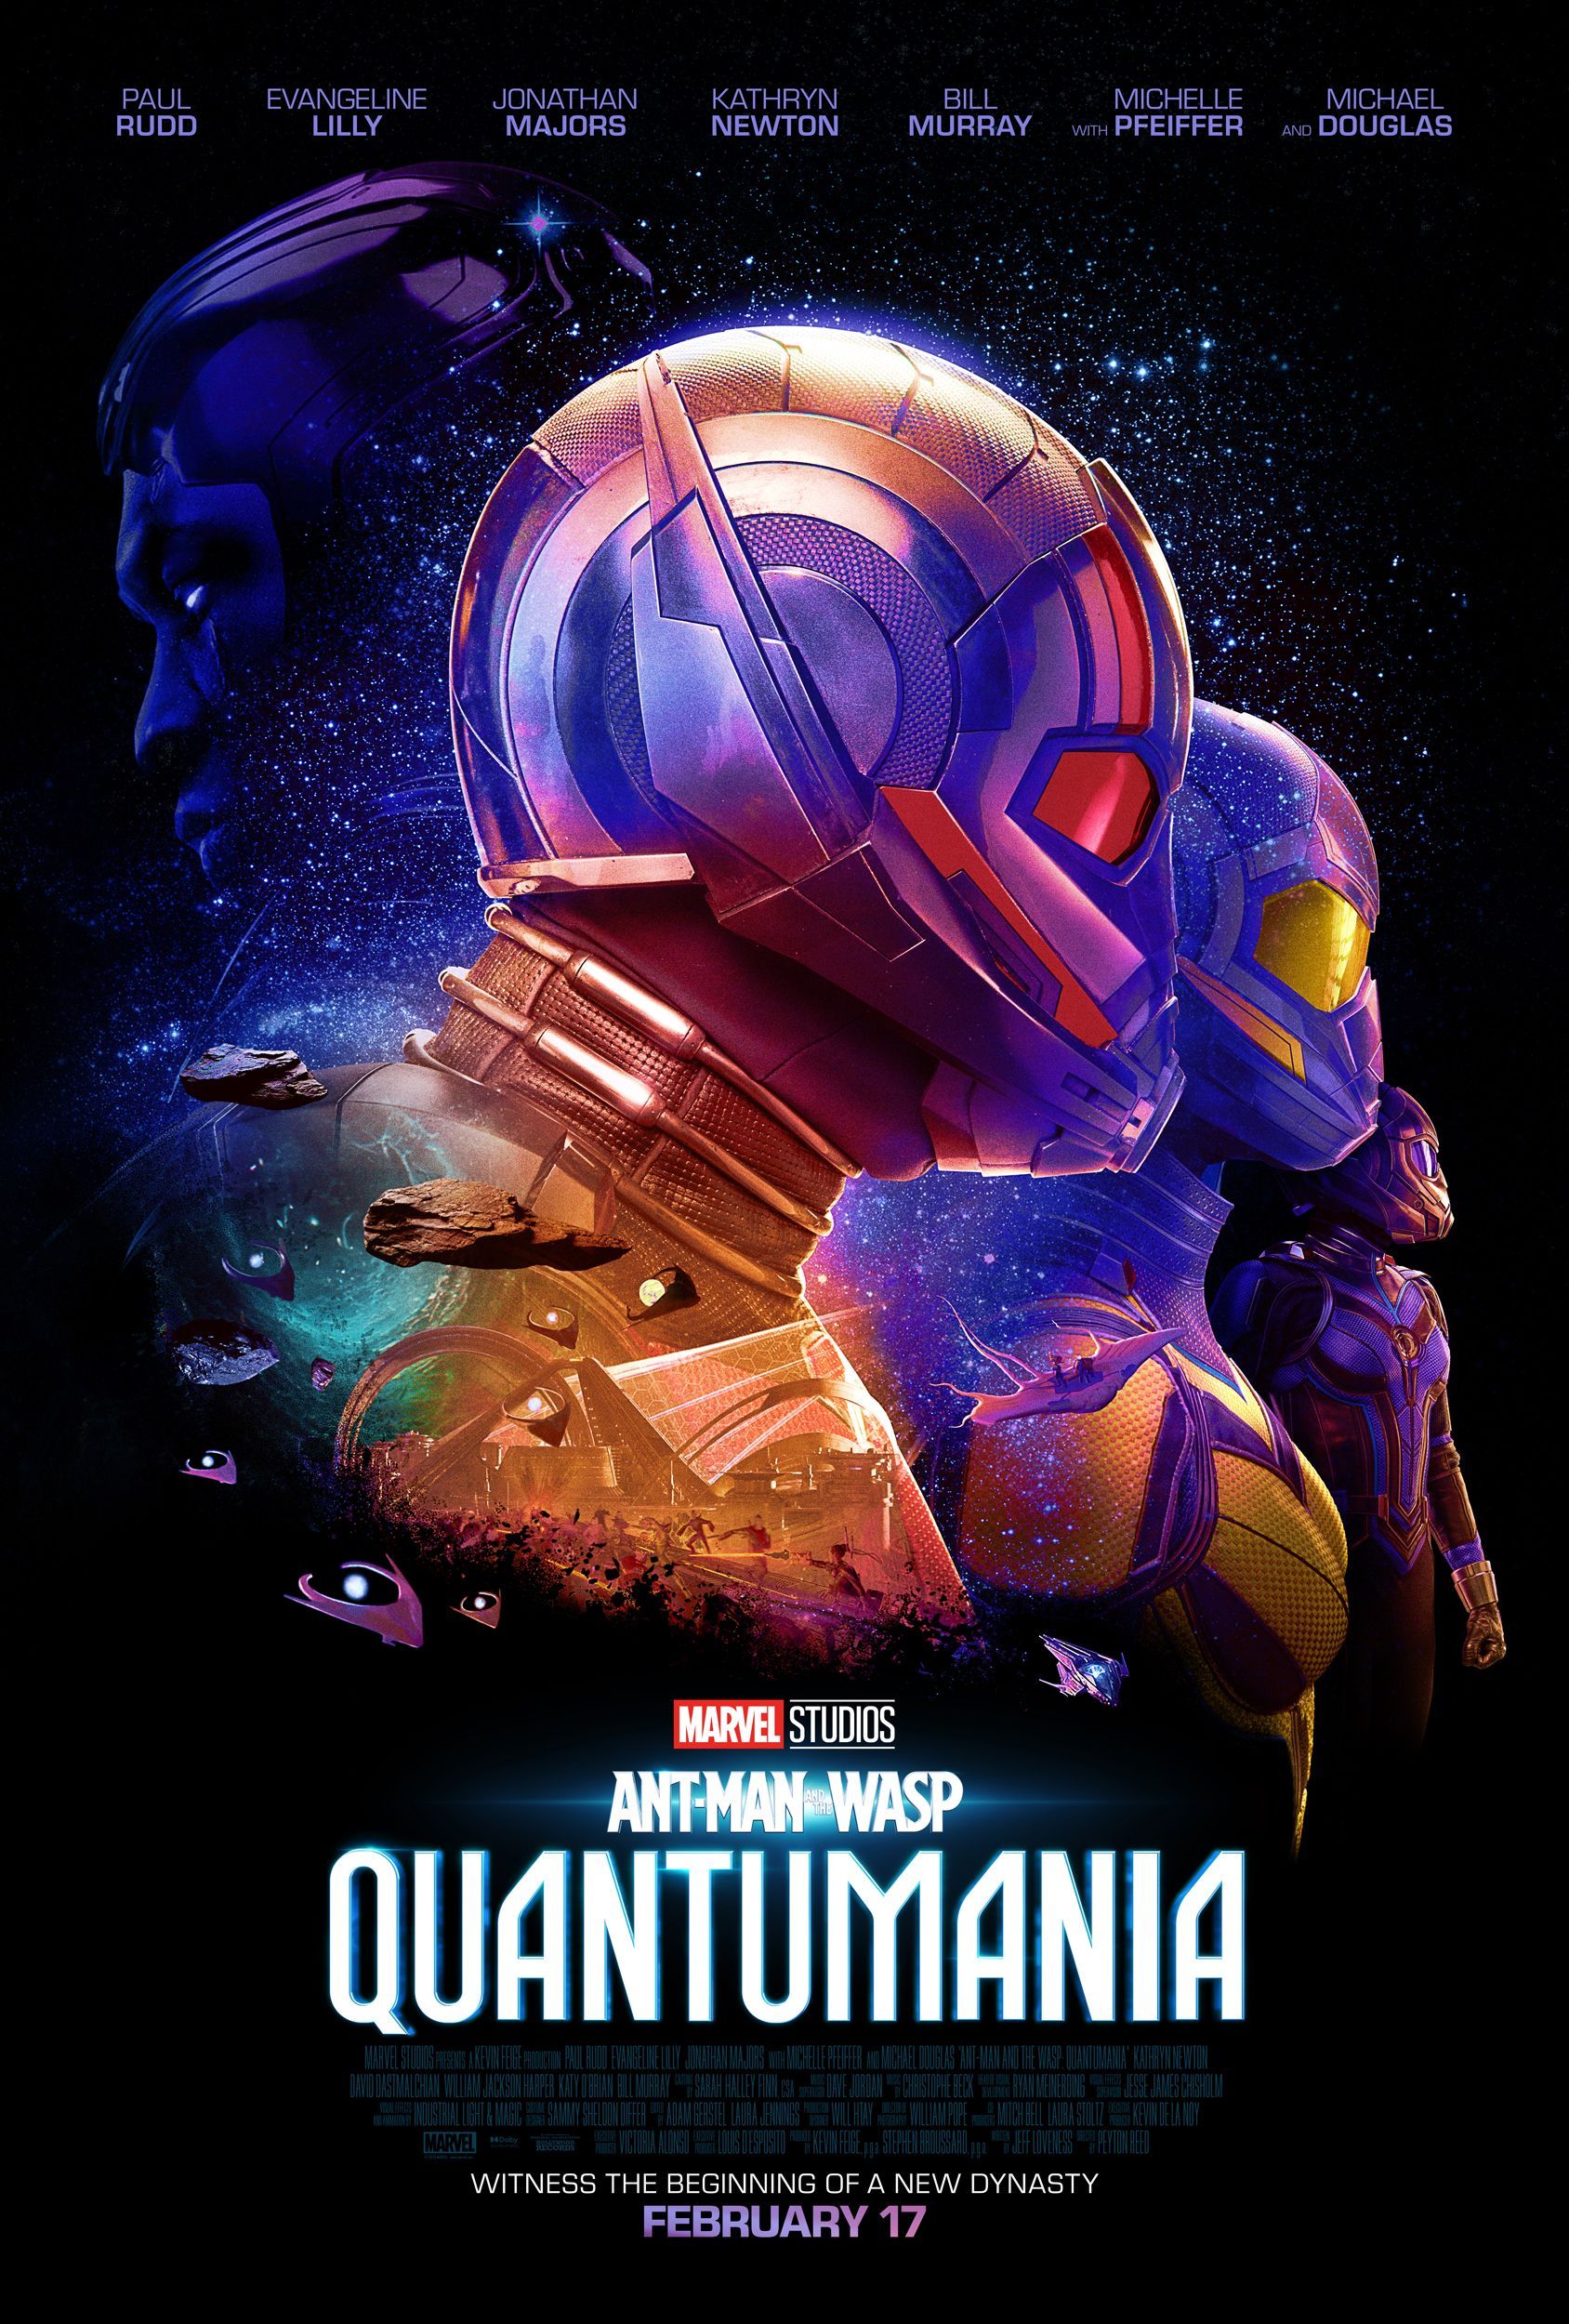 'Ant-Man and the Wasp: Quantumania' Tickets